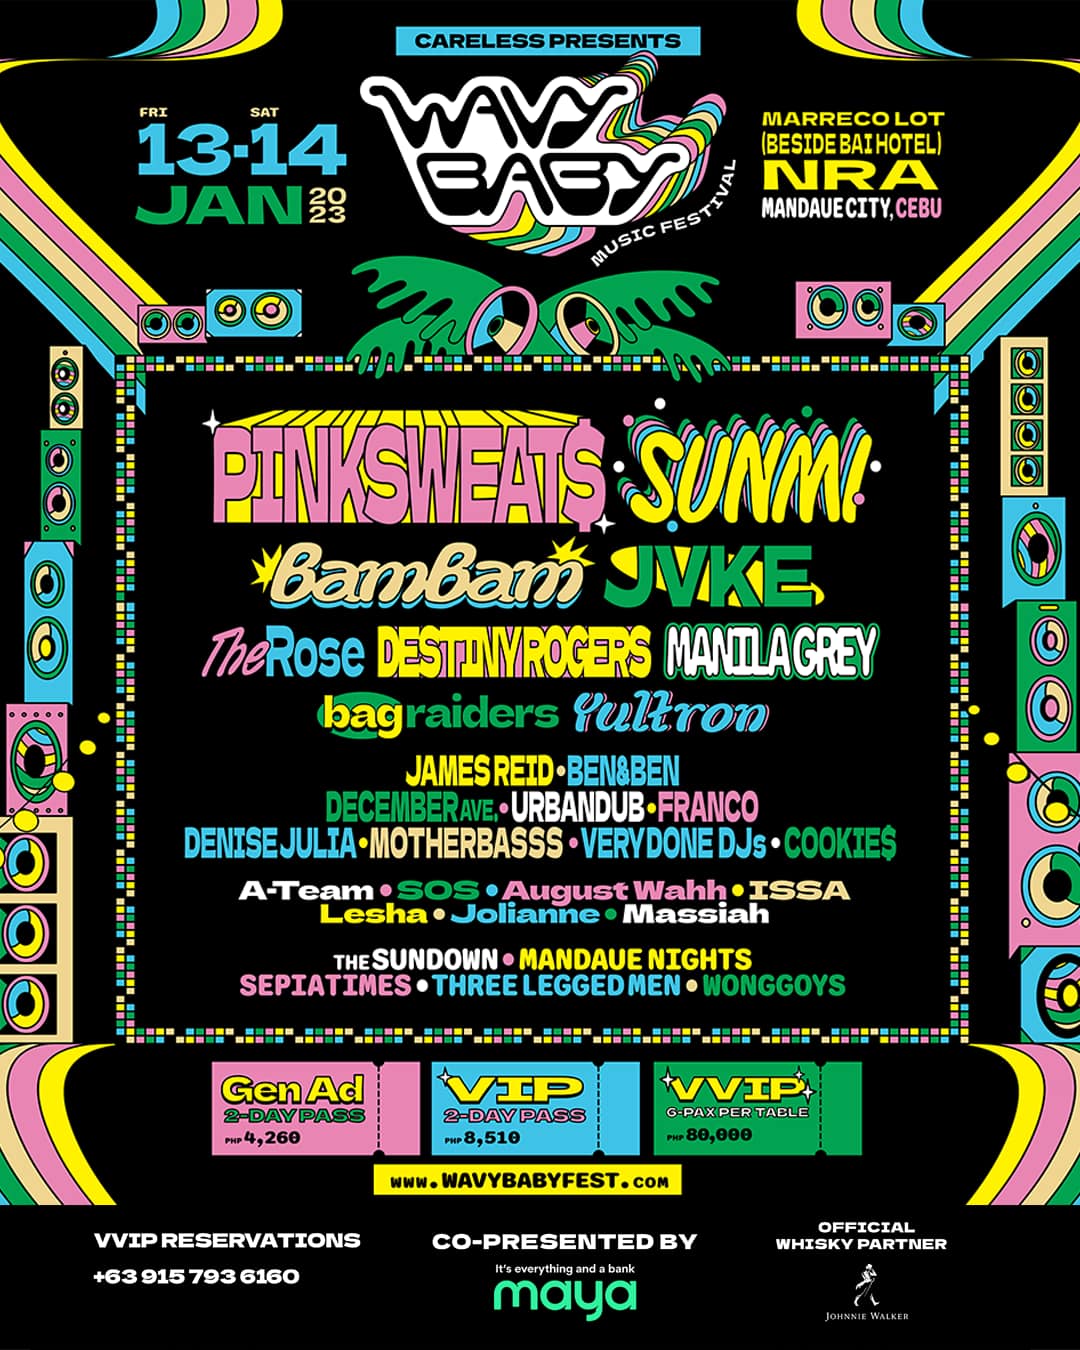 Amazing Local Artists you don’t want to miss at Wavy Baby Music Festival